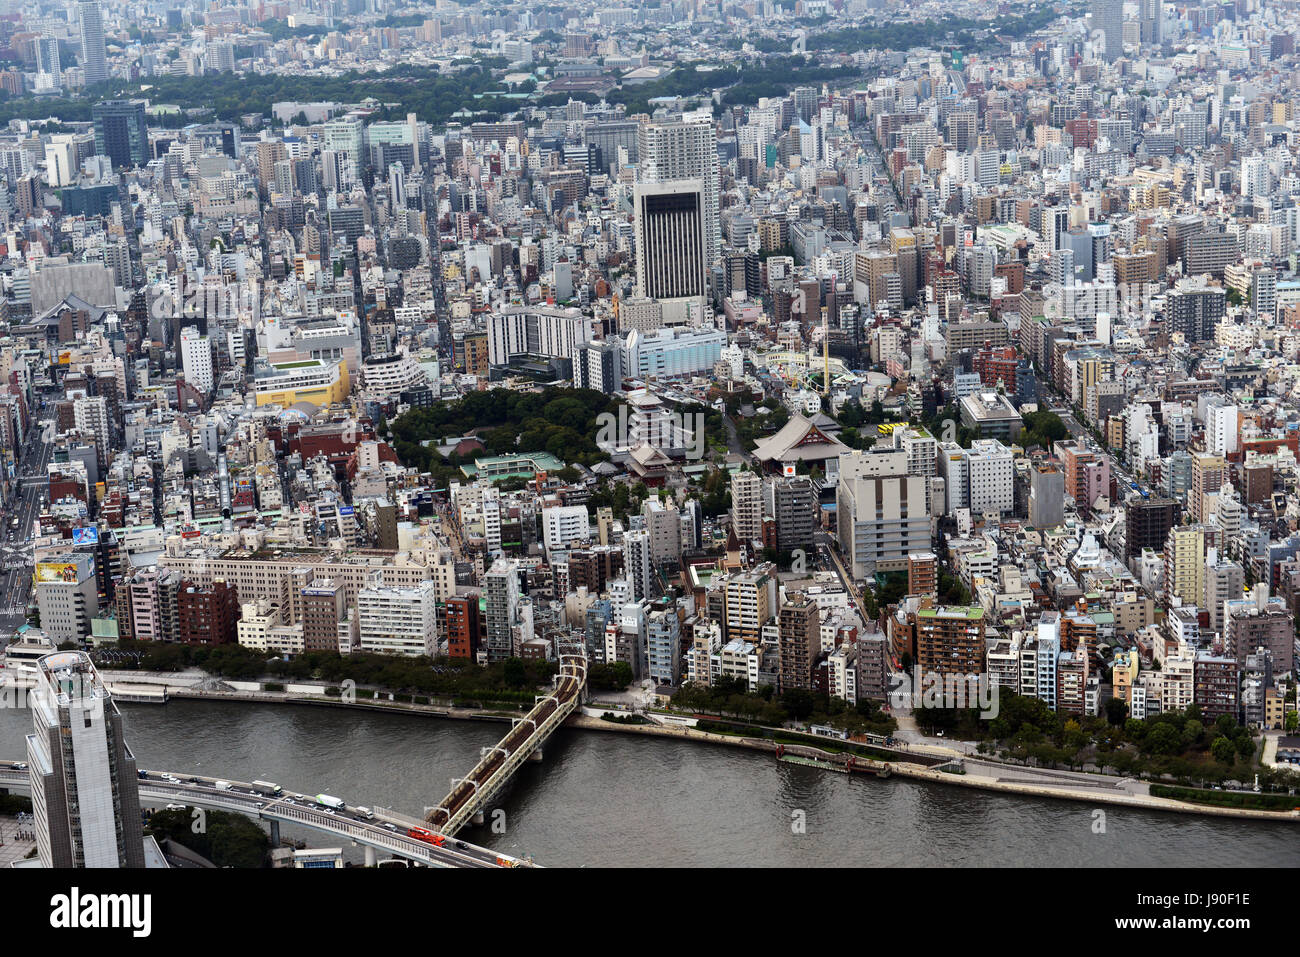 Views of Tokyo as seen from the top of the Tokyo skytree. Stock Photo